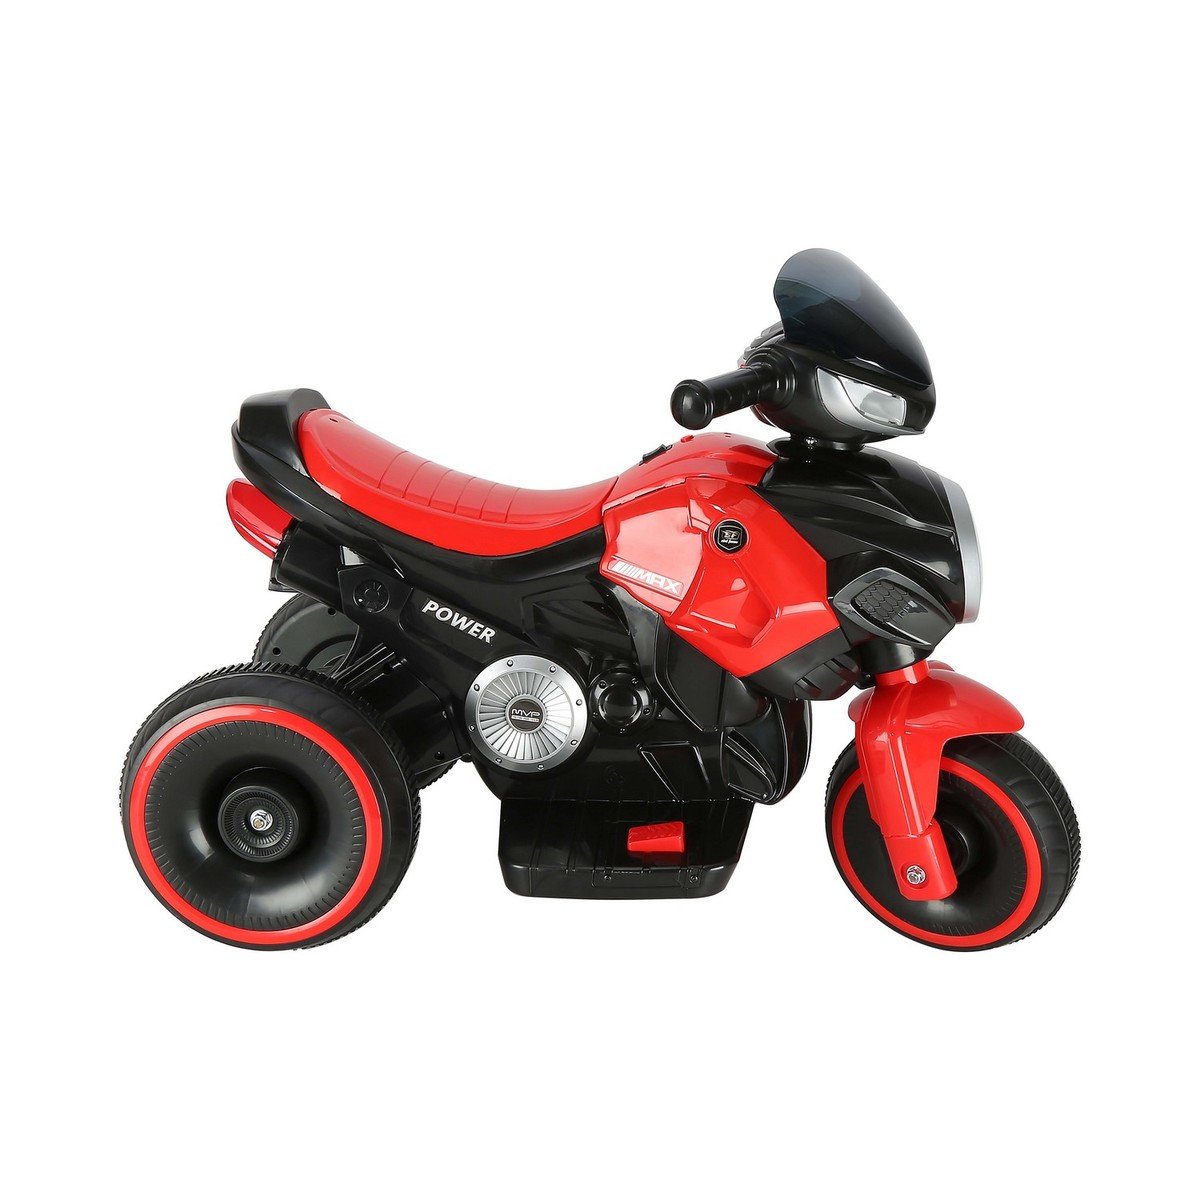 Skid Fusion Child Rechargeable Motor Bike FD9808 (Color may vary)